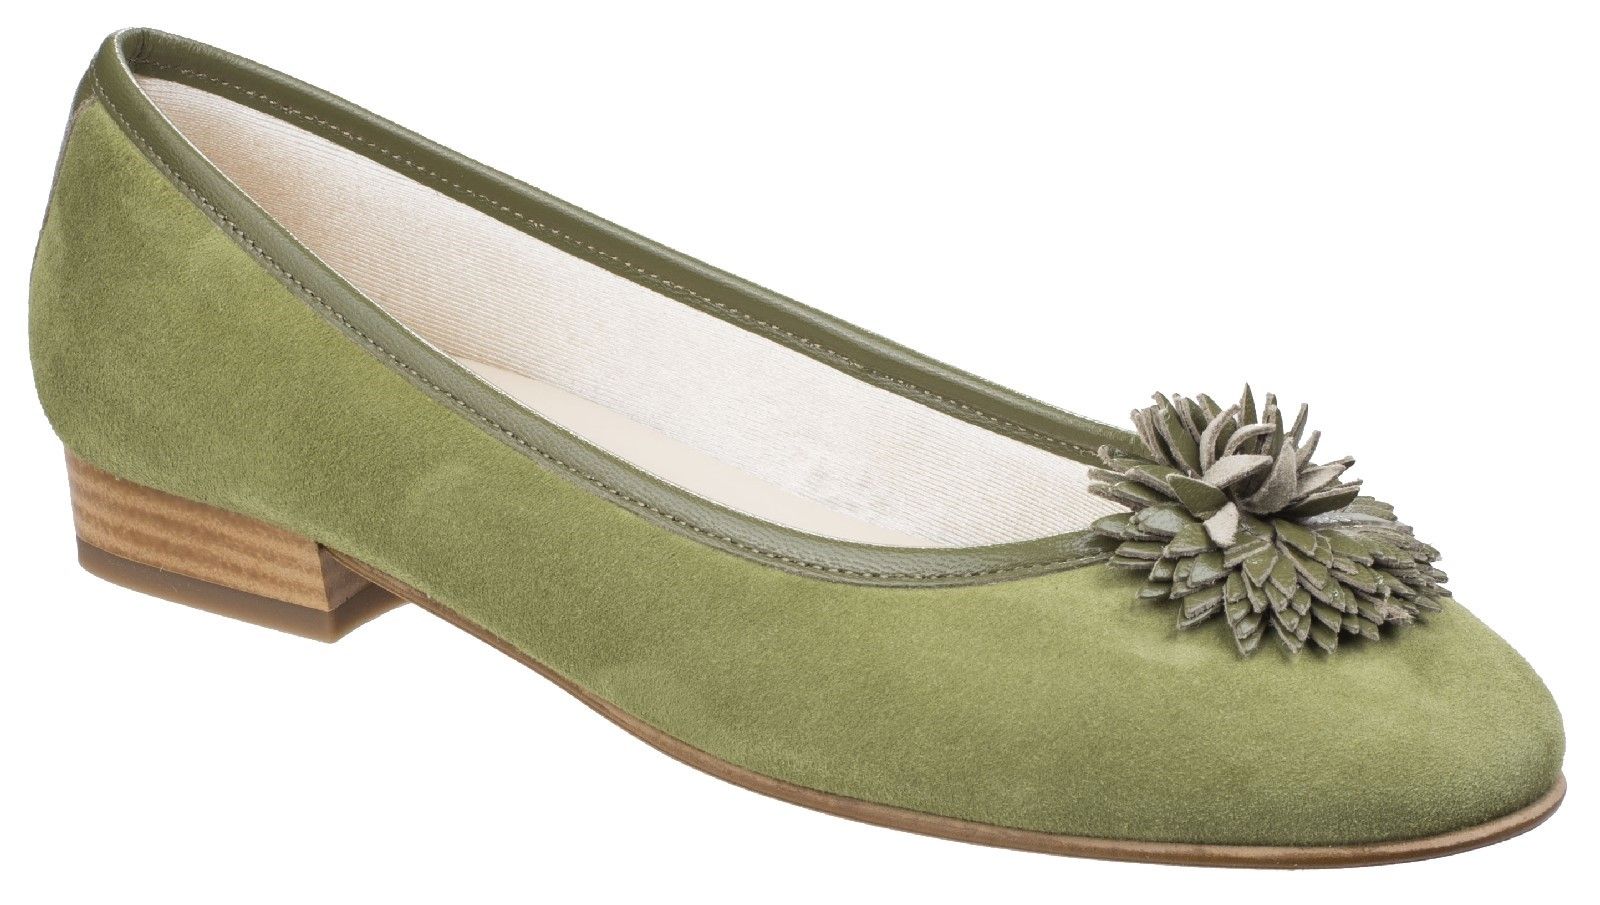 Riva are renowned for their vast collection of ballerinas, original design, sumptuous materials and colour combinations. Here an elegant floral design adorns a modern ballerina crafted from luxury soft suede uppers. Ladies' slip on ballerina court shoe. 
Luxury soft brushed suede leather upper. 
Delicate leather layered floral cutting decoration. 
Wide opening with leather rim finish. 
Silky smooth comfort padded textile lining.